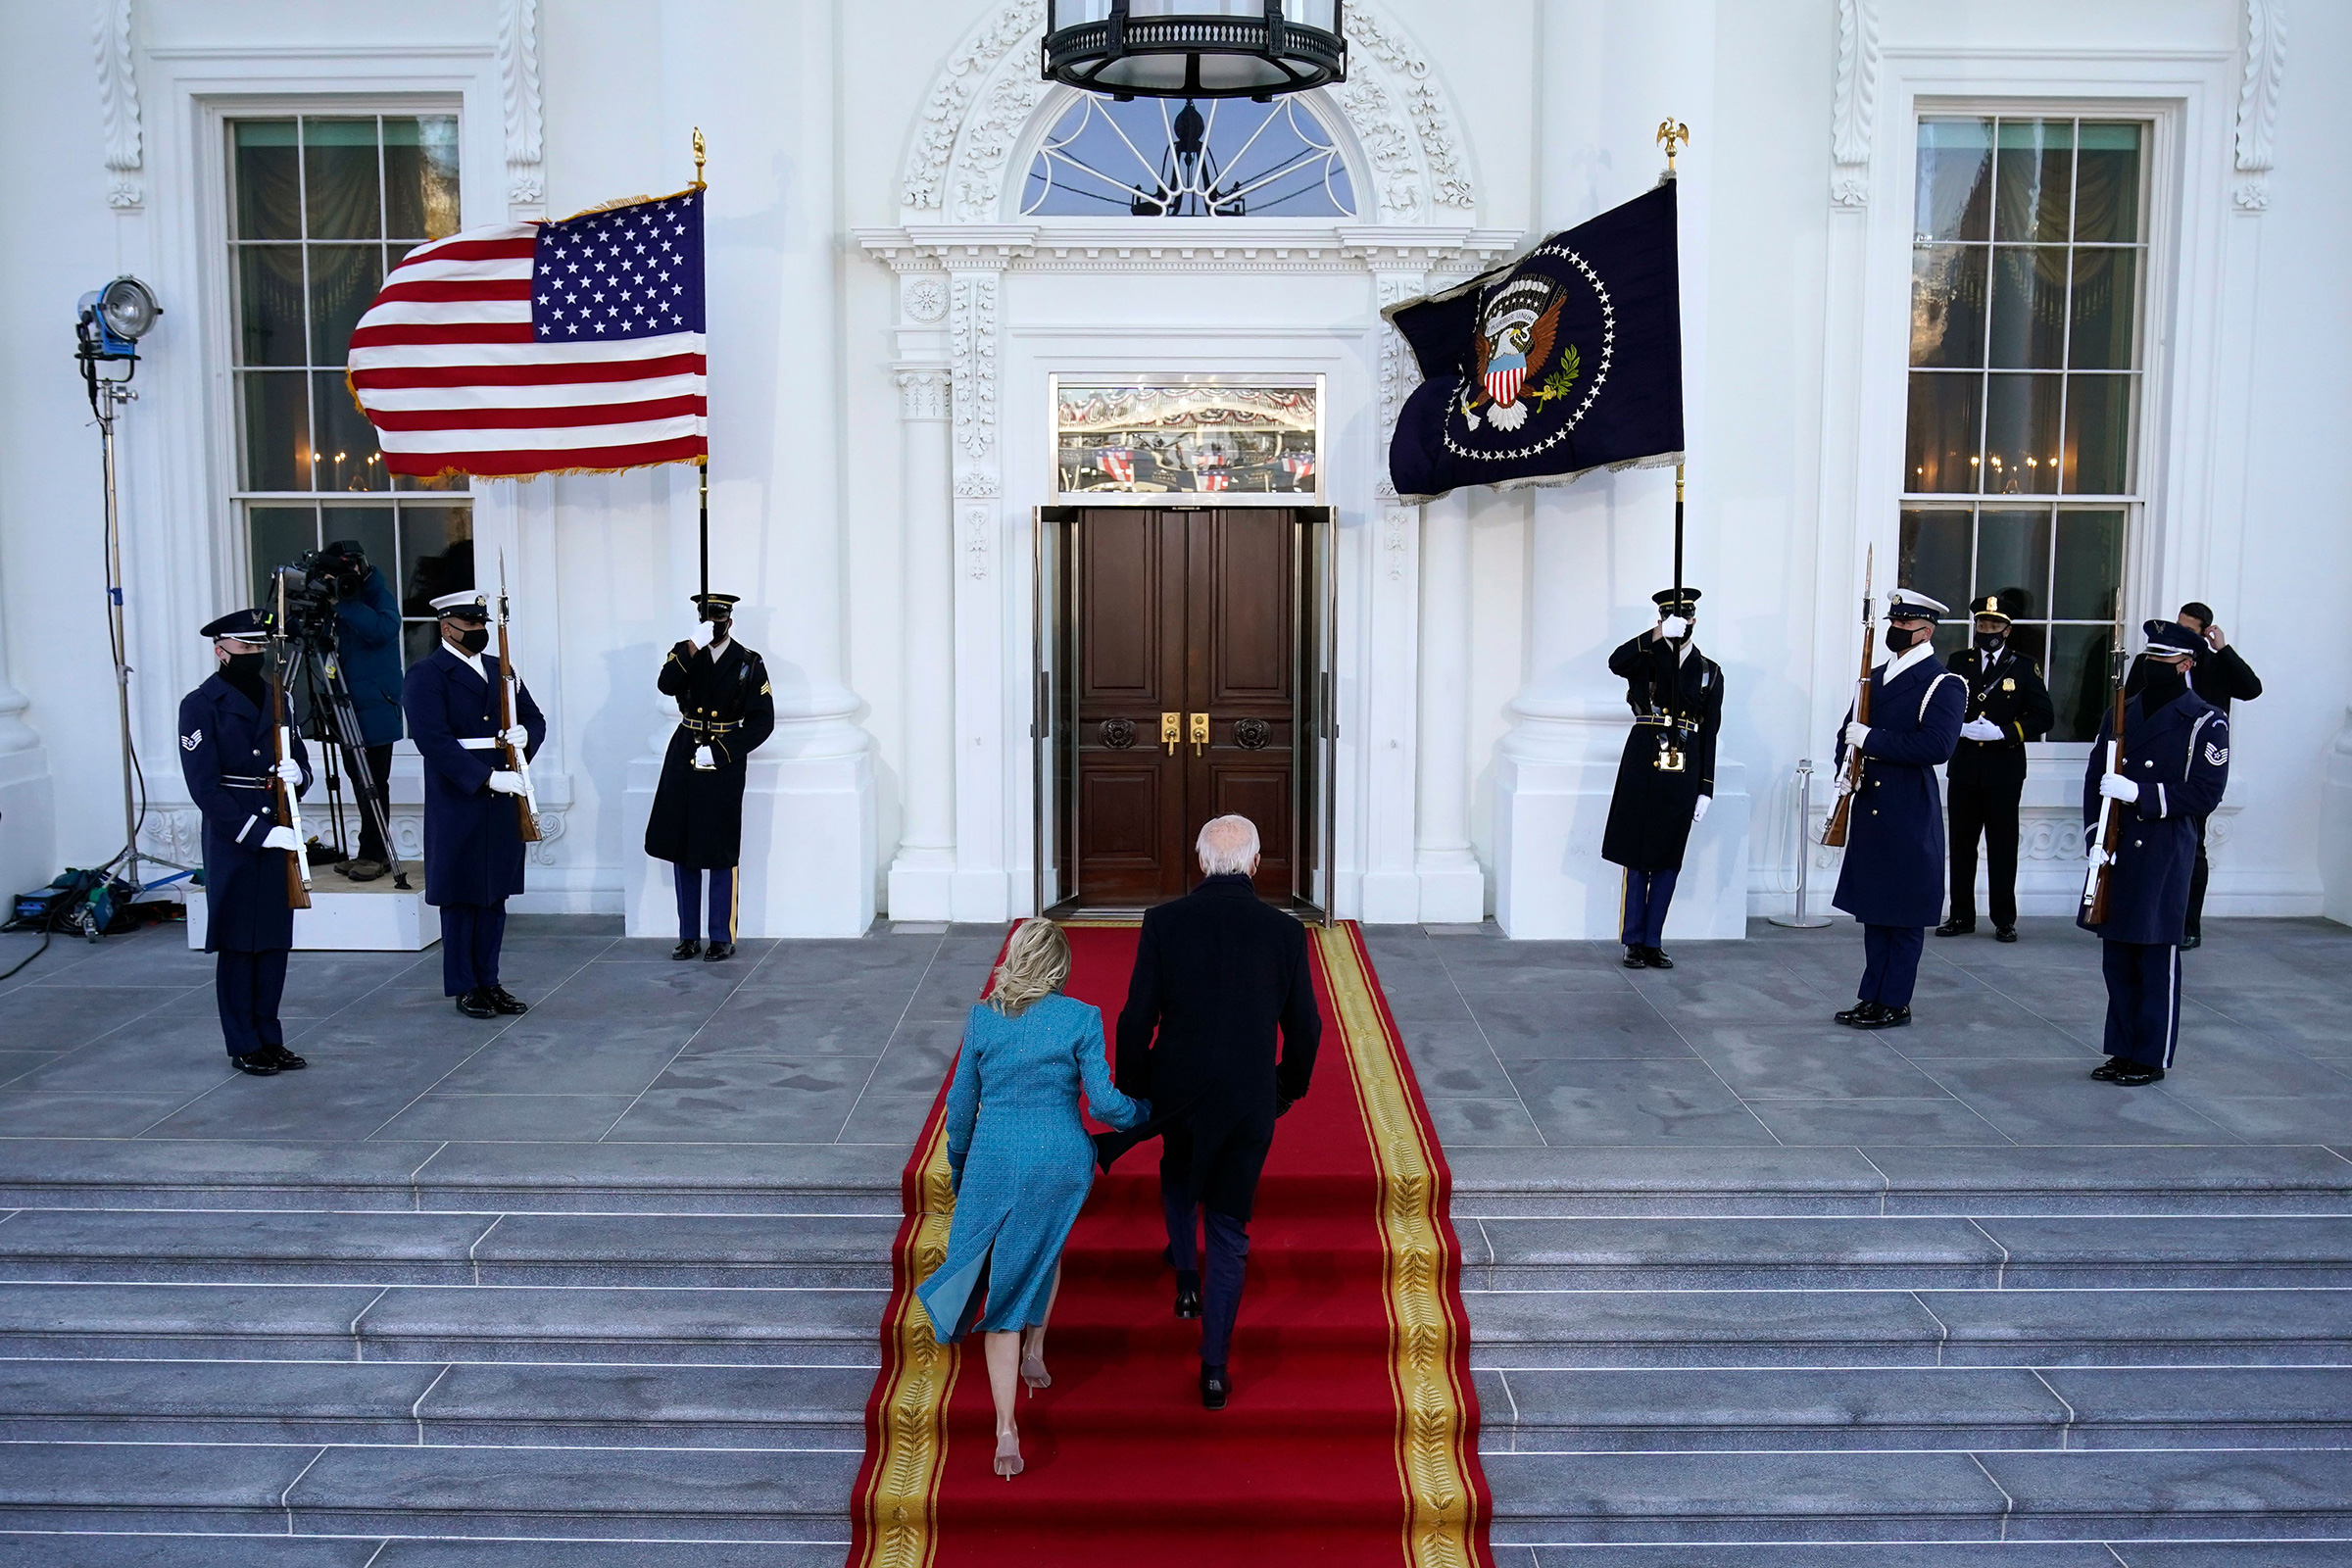 President Joe Biden and first lady Dr. Jill Biden walk up the stairs as they arrive at the North Portico of the White House.